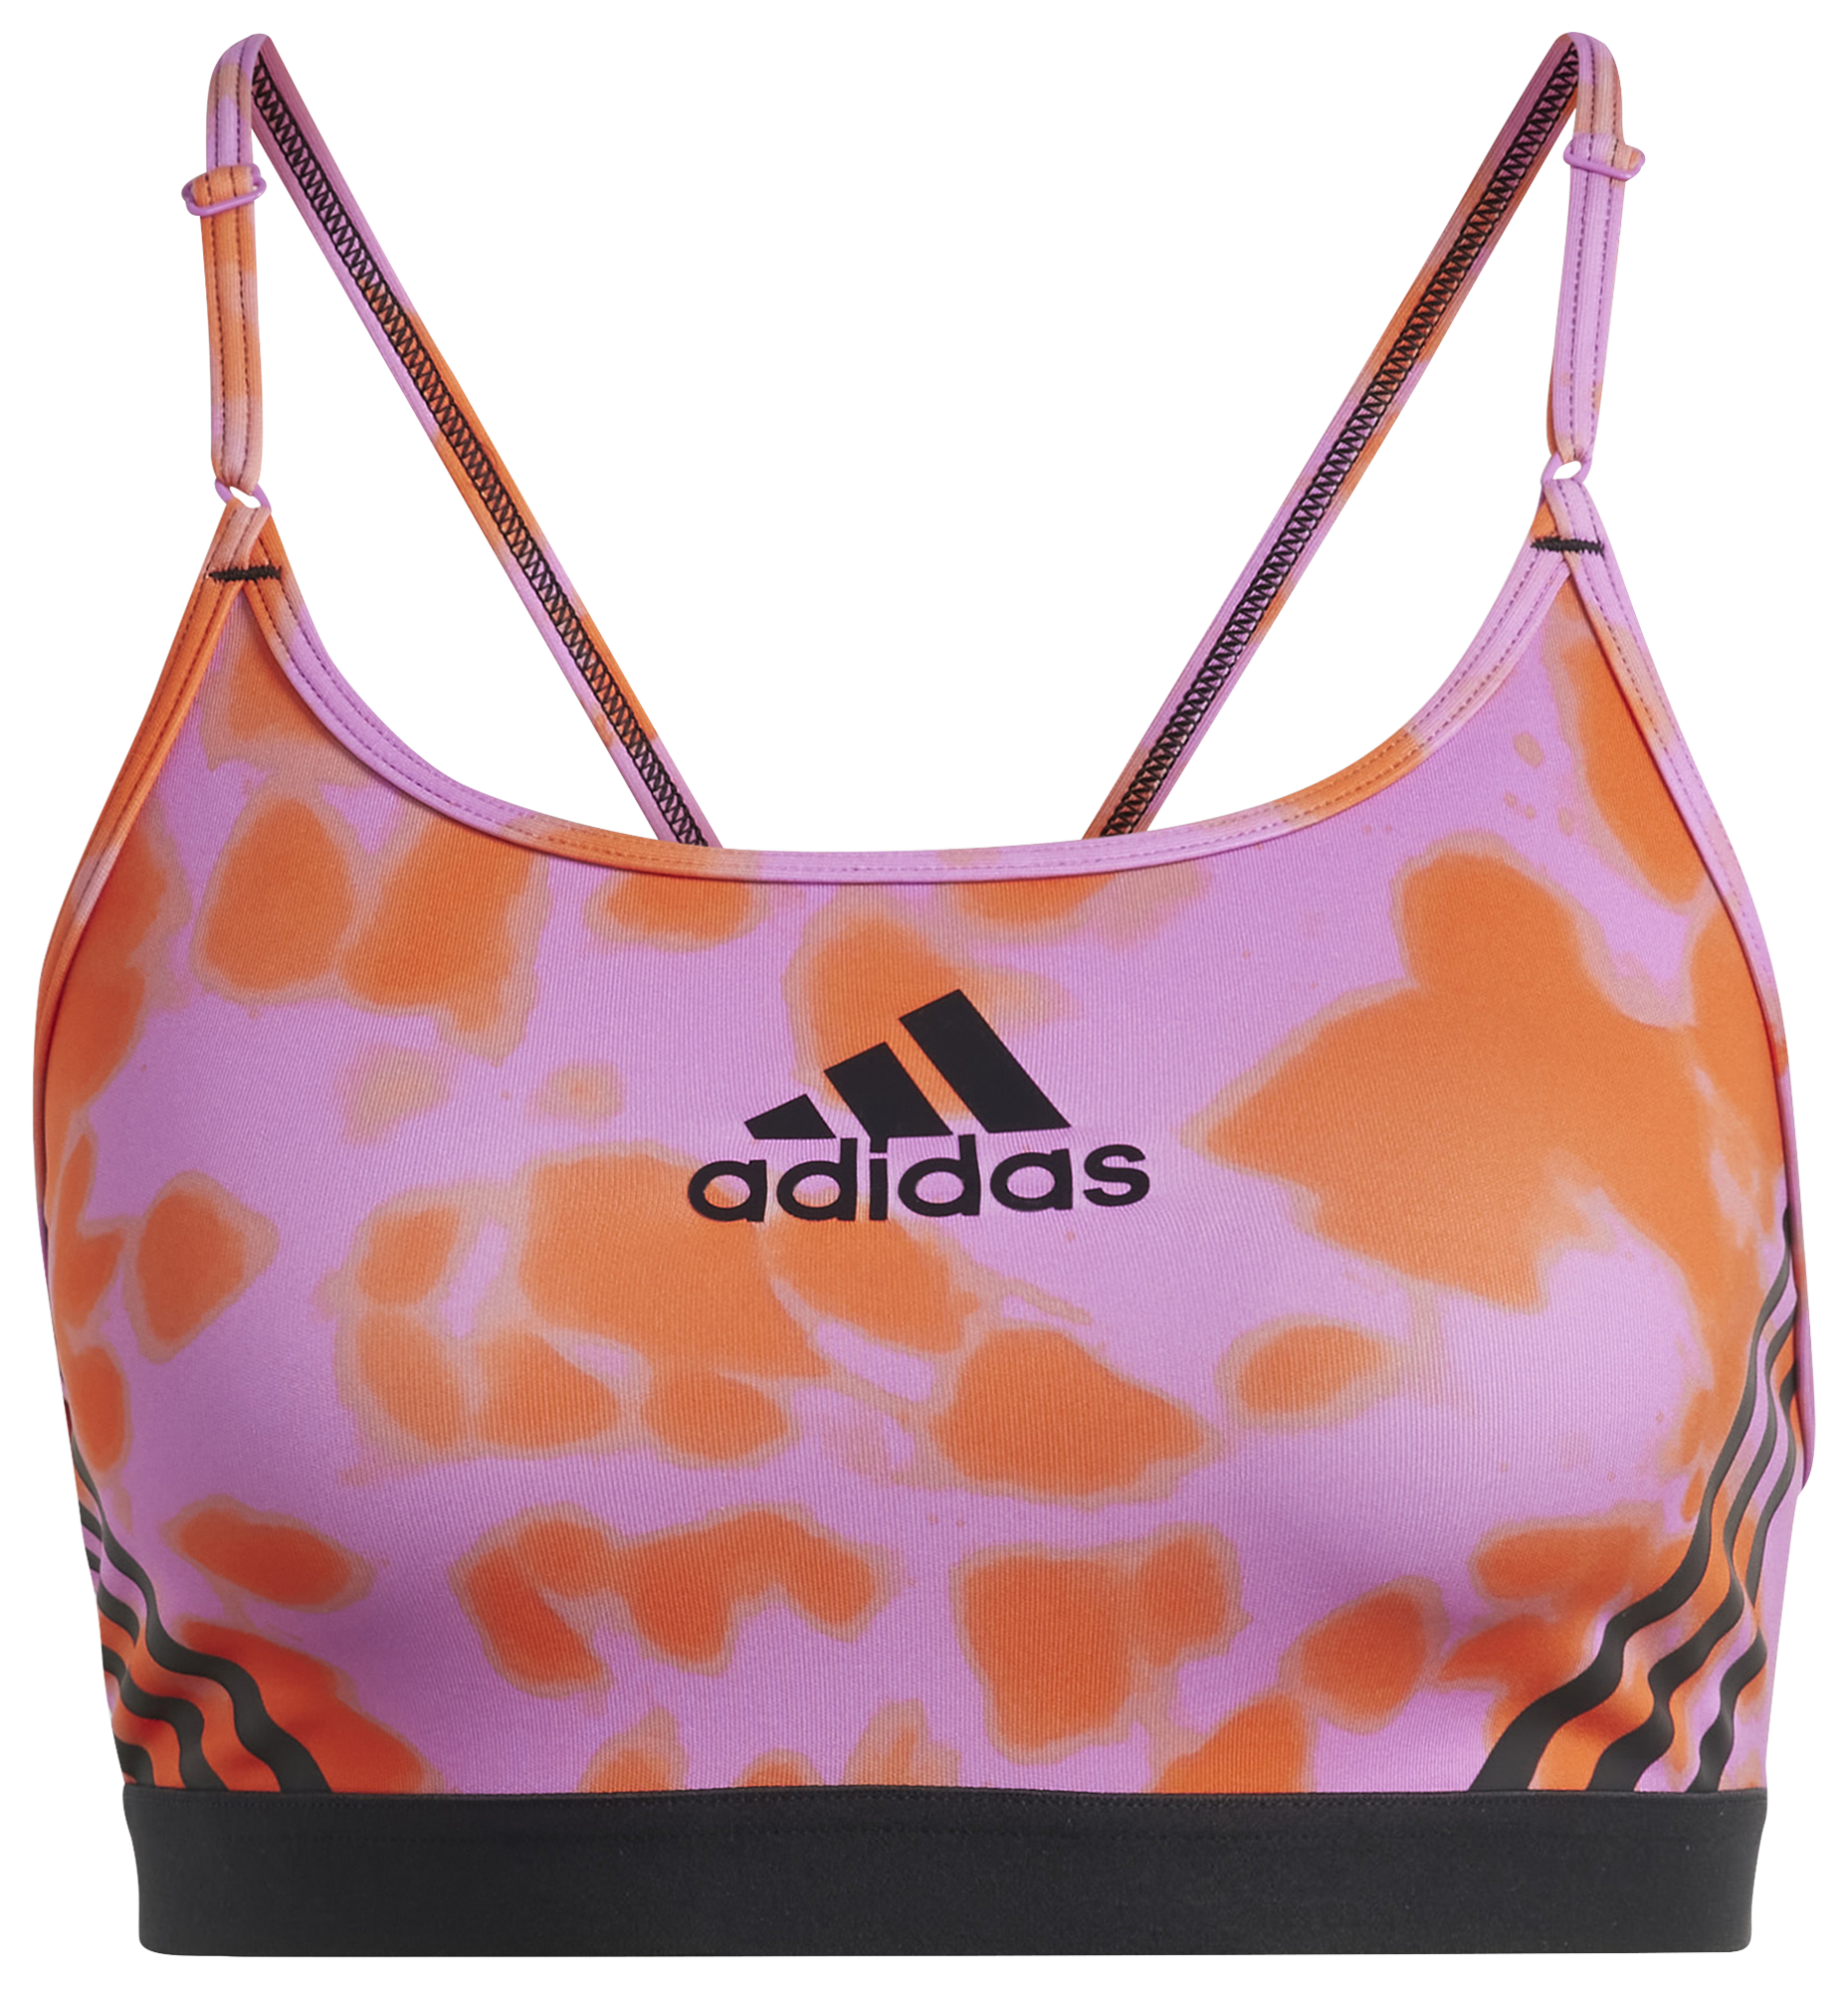 adidas Performance Collective Power Fastimpact Luxe High-support Bra -  Black